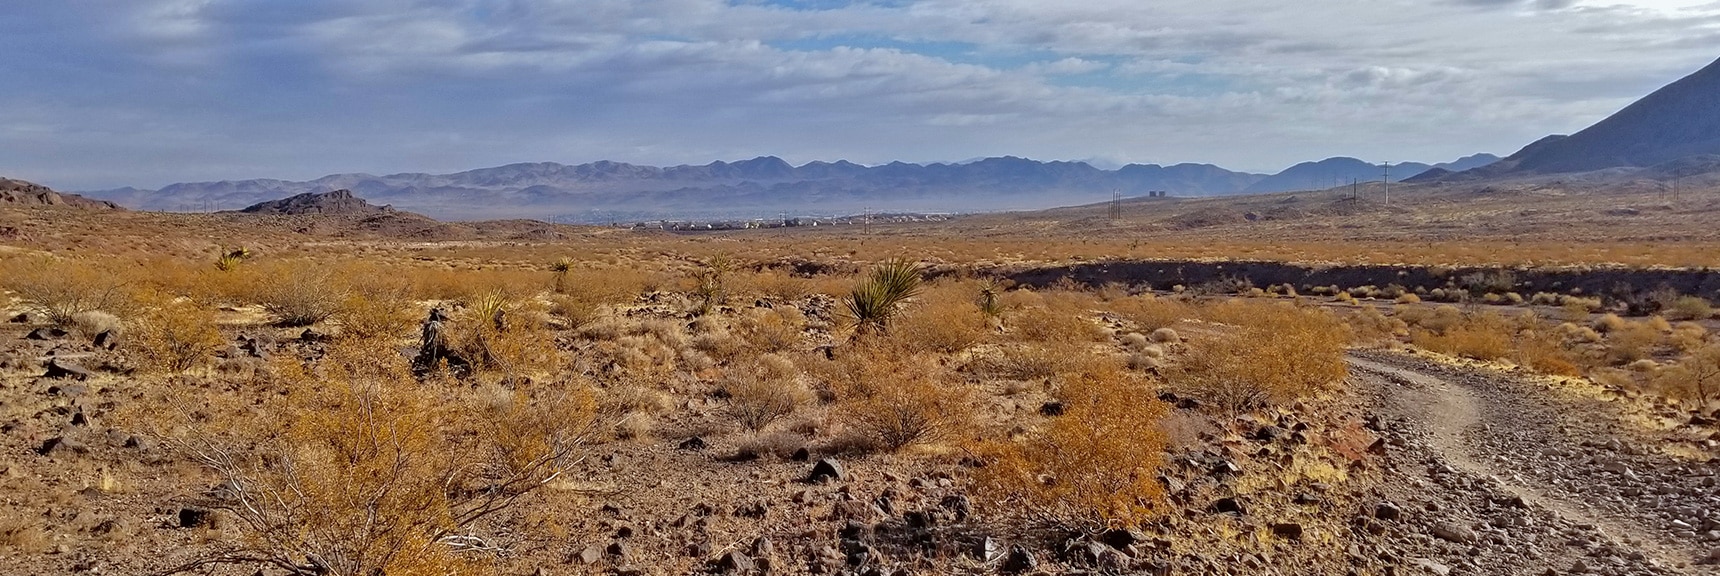 Higher View Back Toward Henderson. Lake Mead Beyond the Far Hills| McCullough Hills Trail in Sloan Canyon National Conservation Area, Nevada